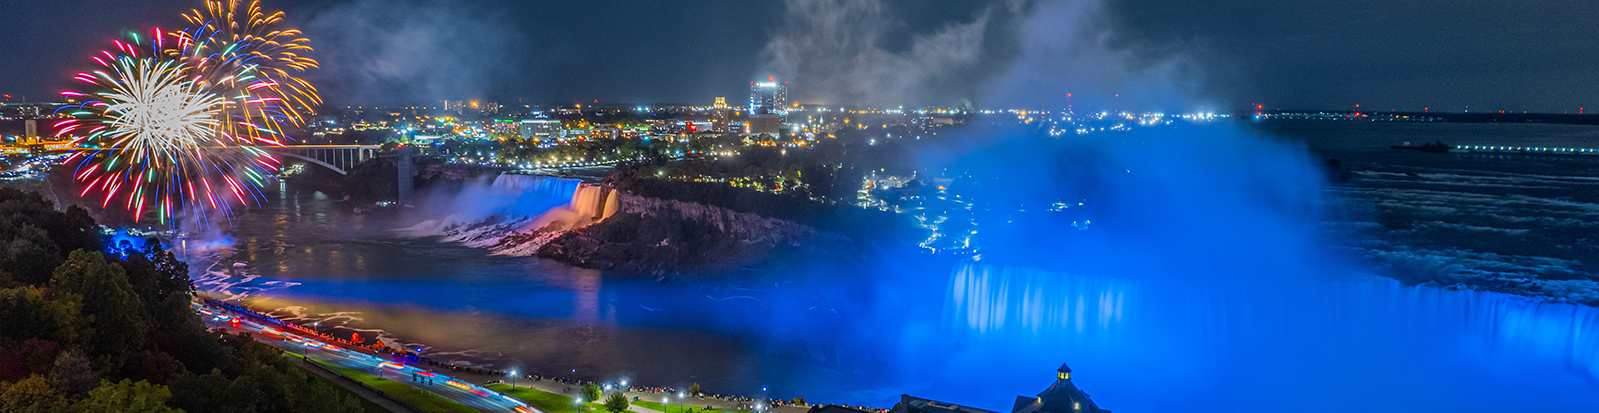 Sky Fallsview Steakhouse - Nightly Fireworks Over the Falls